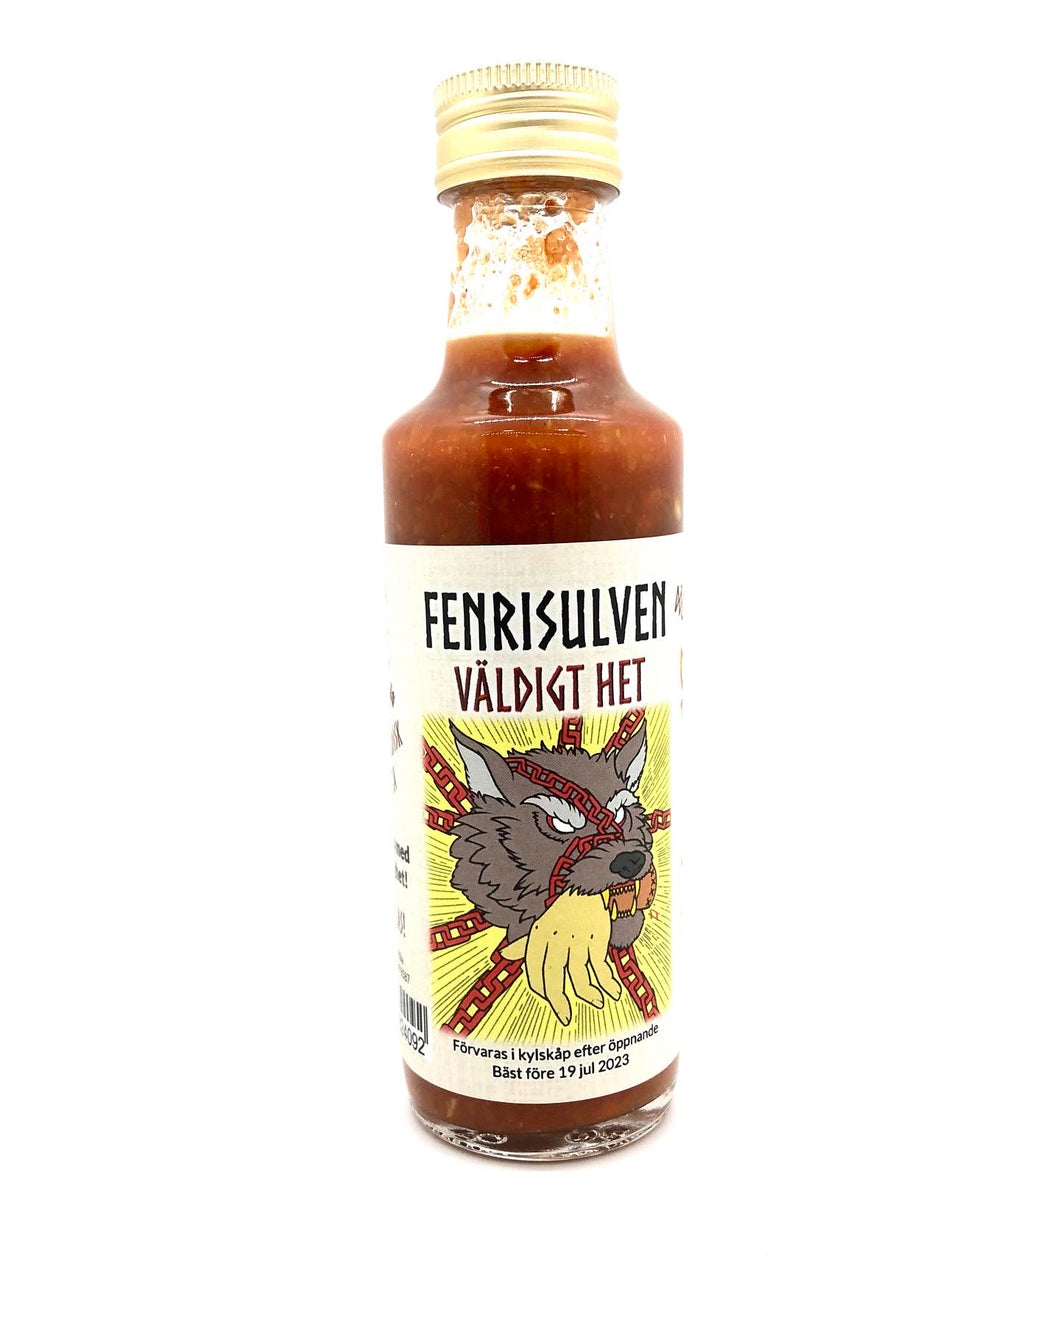 Fenrisulven - very hot and smoky chilli sauce